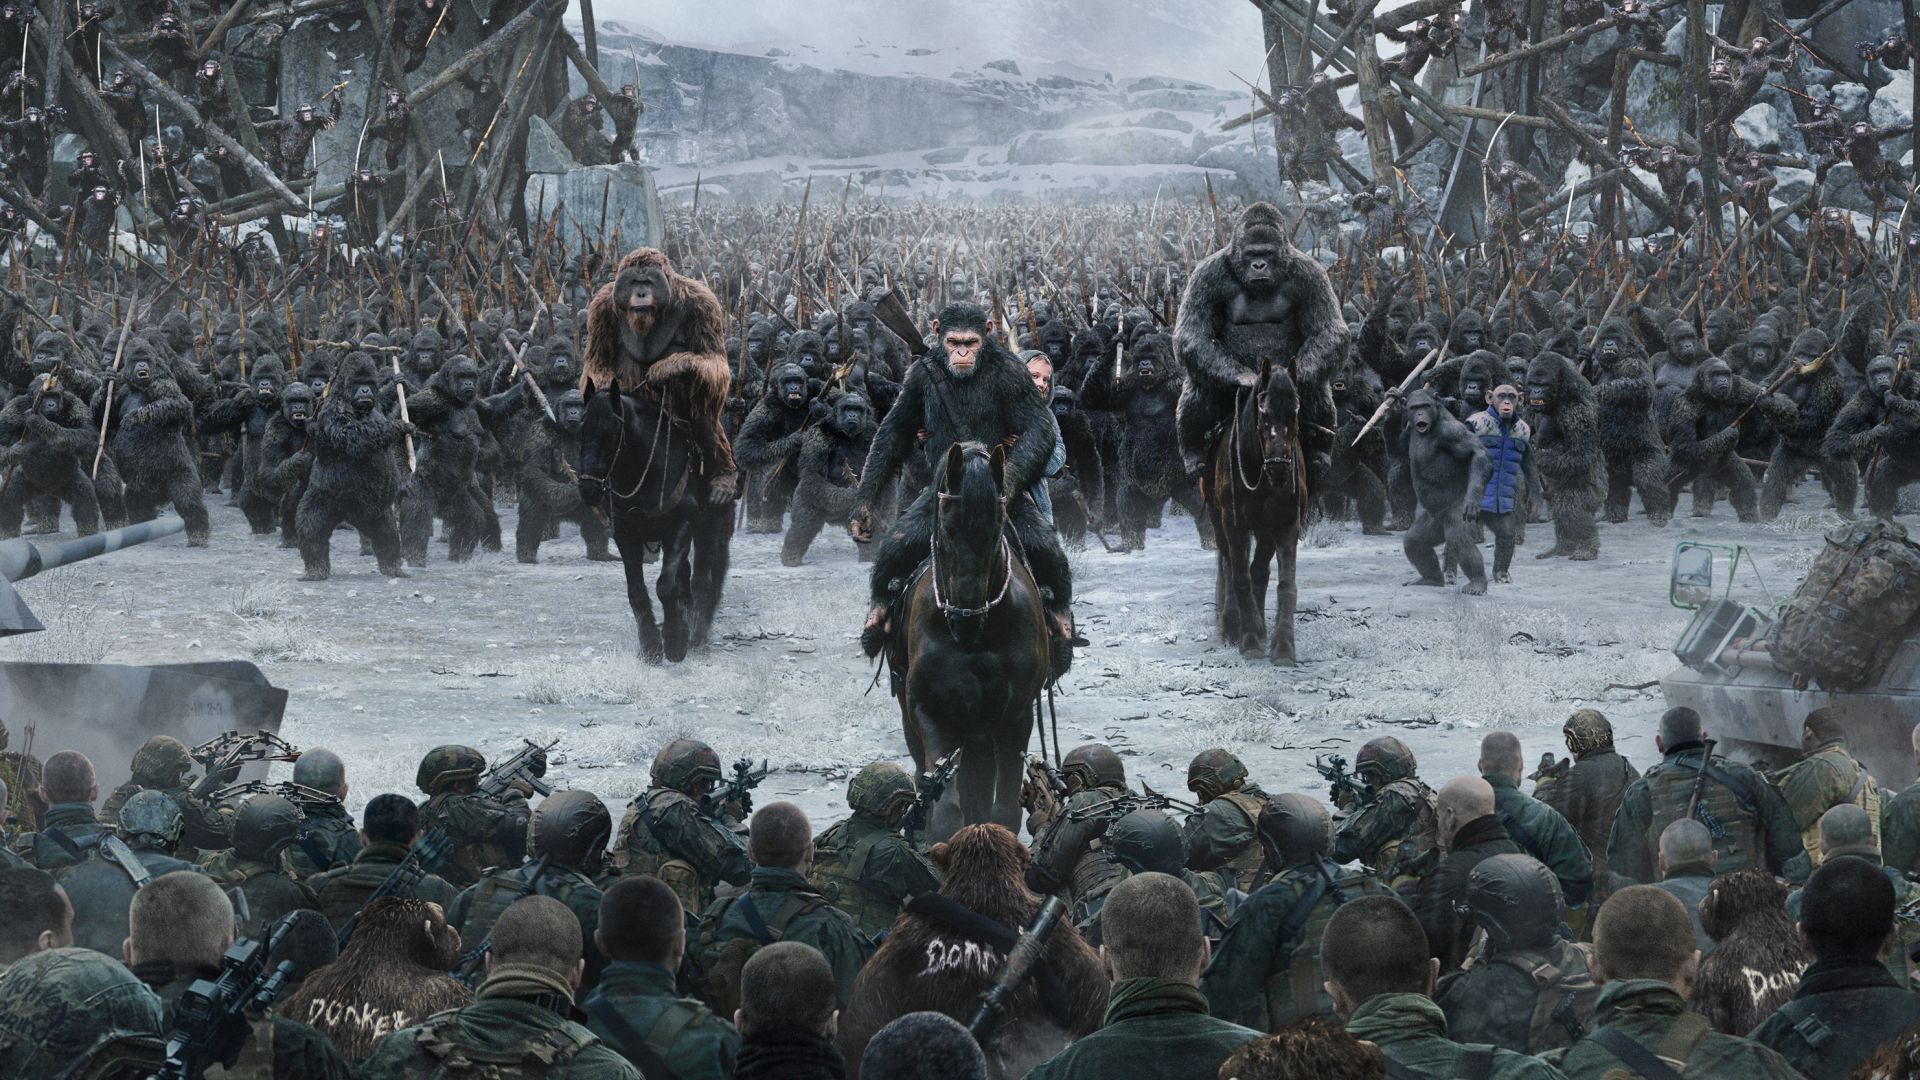 Wallpaper War for the Planet of the Apes, 2017 movie, monkey army